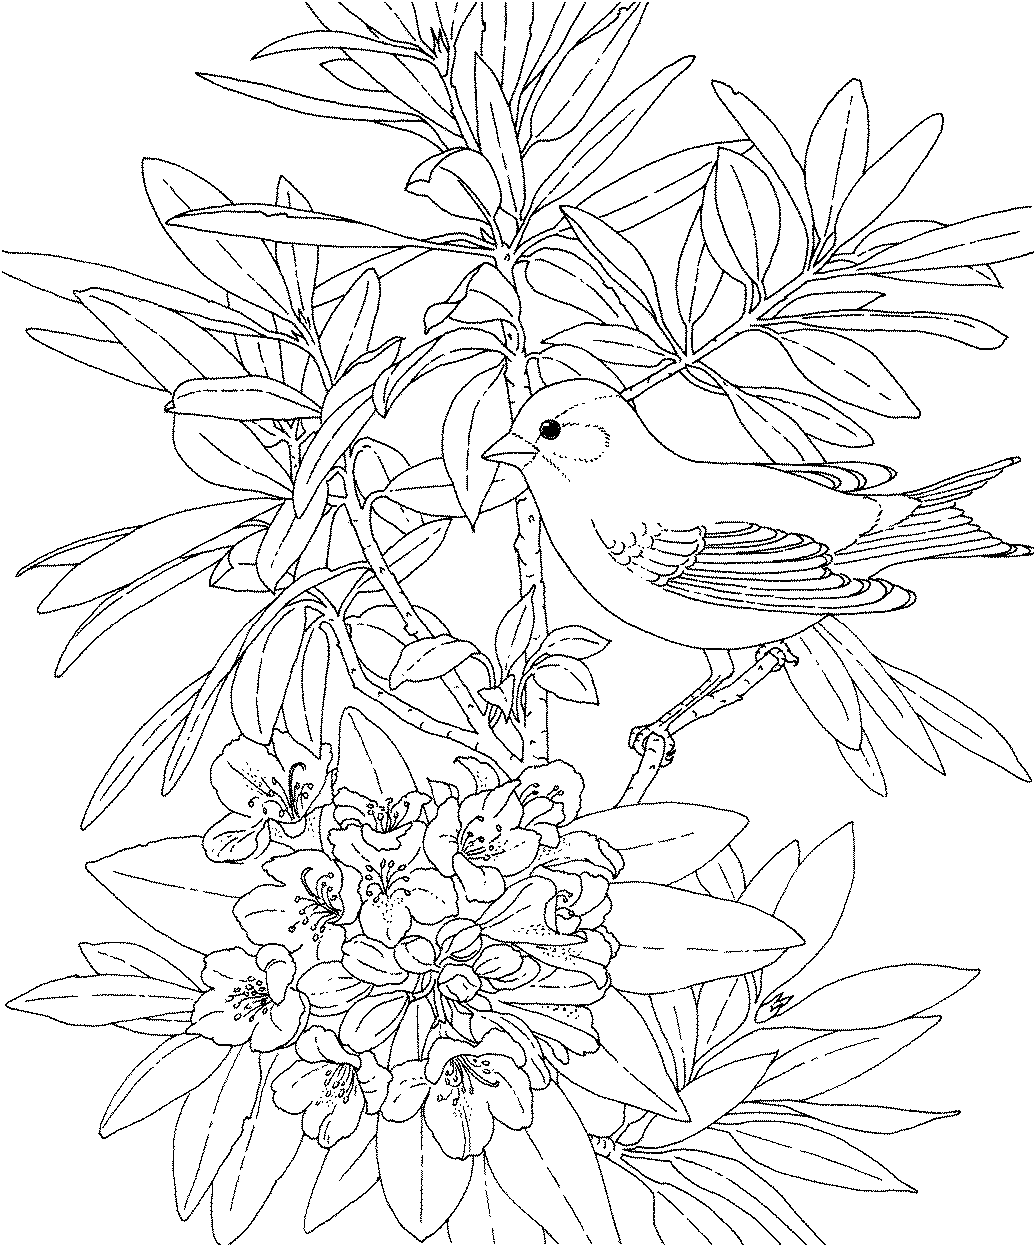 colouring pages for birds coloring sheets for burgess chapters bird coloring pages colouring for pages birds 